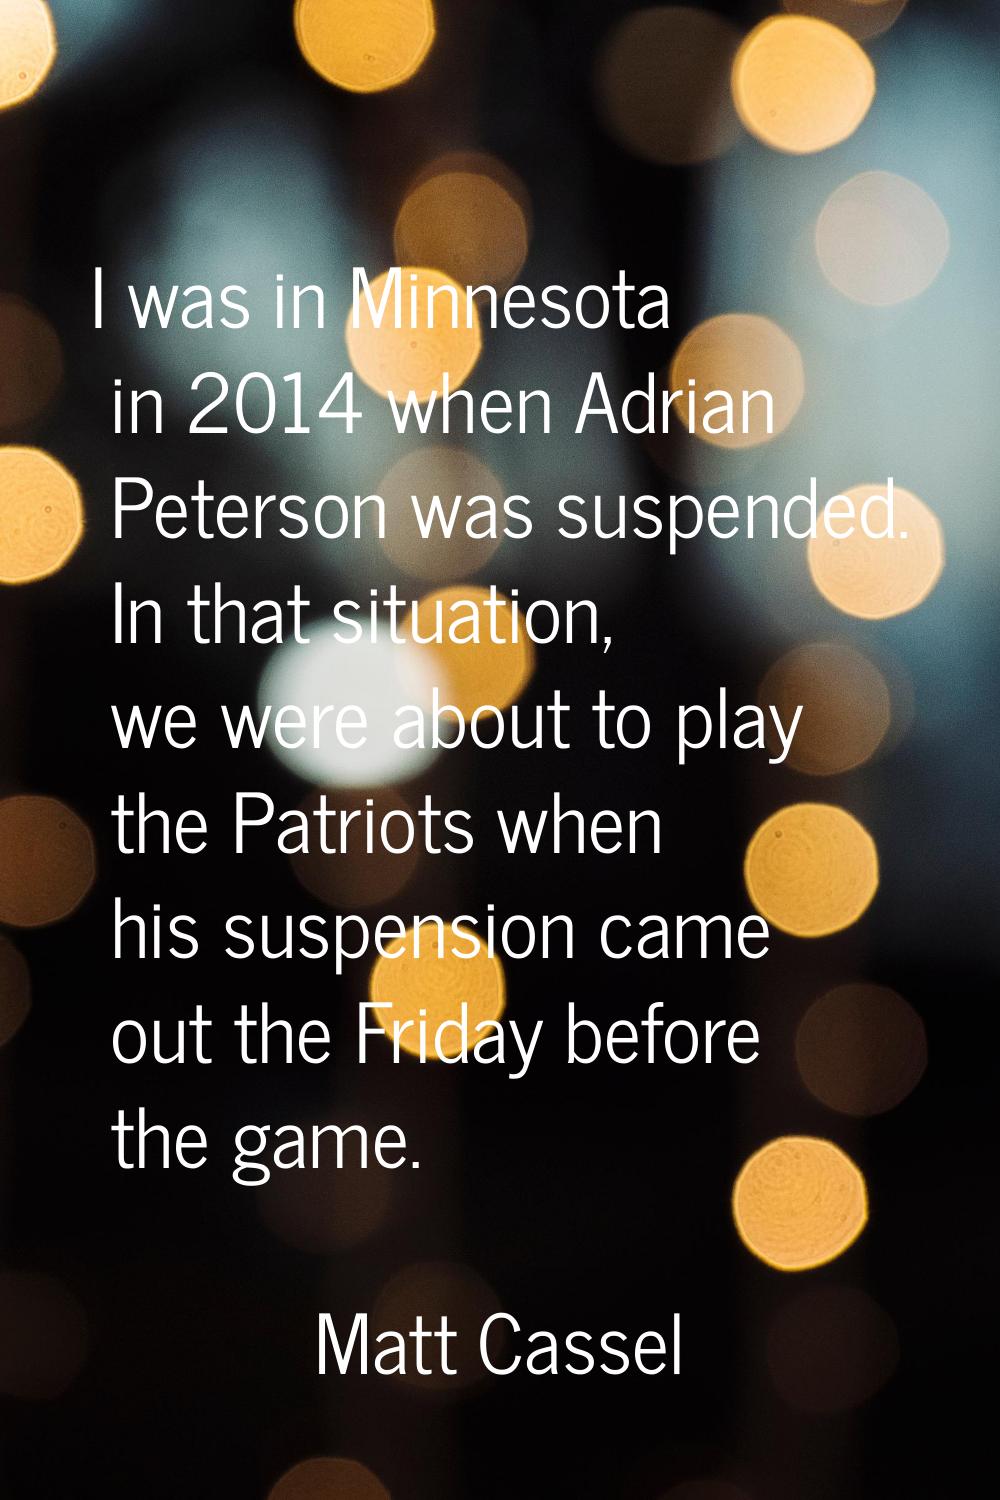 I was in Minnesota in 2014 when Adrian Peterson was suspended. In that situation, we were about to 